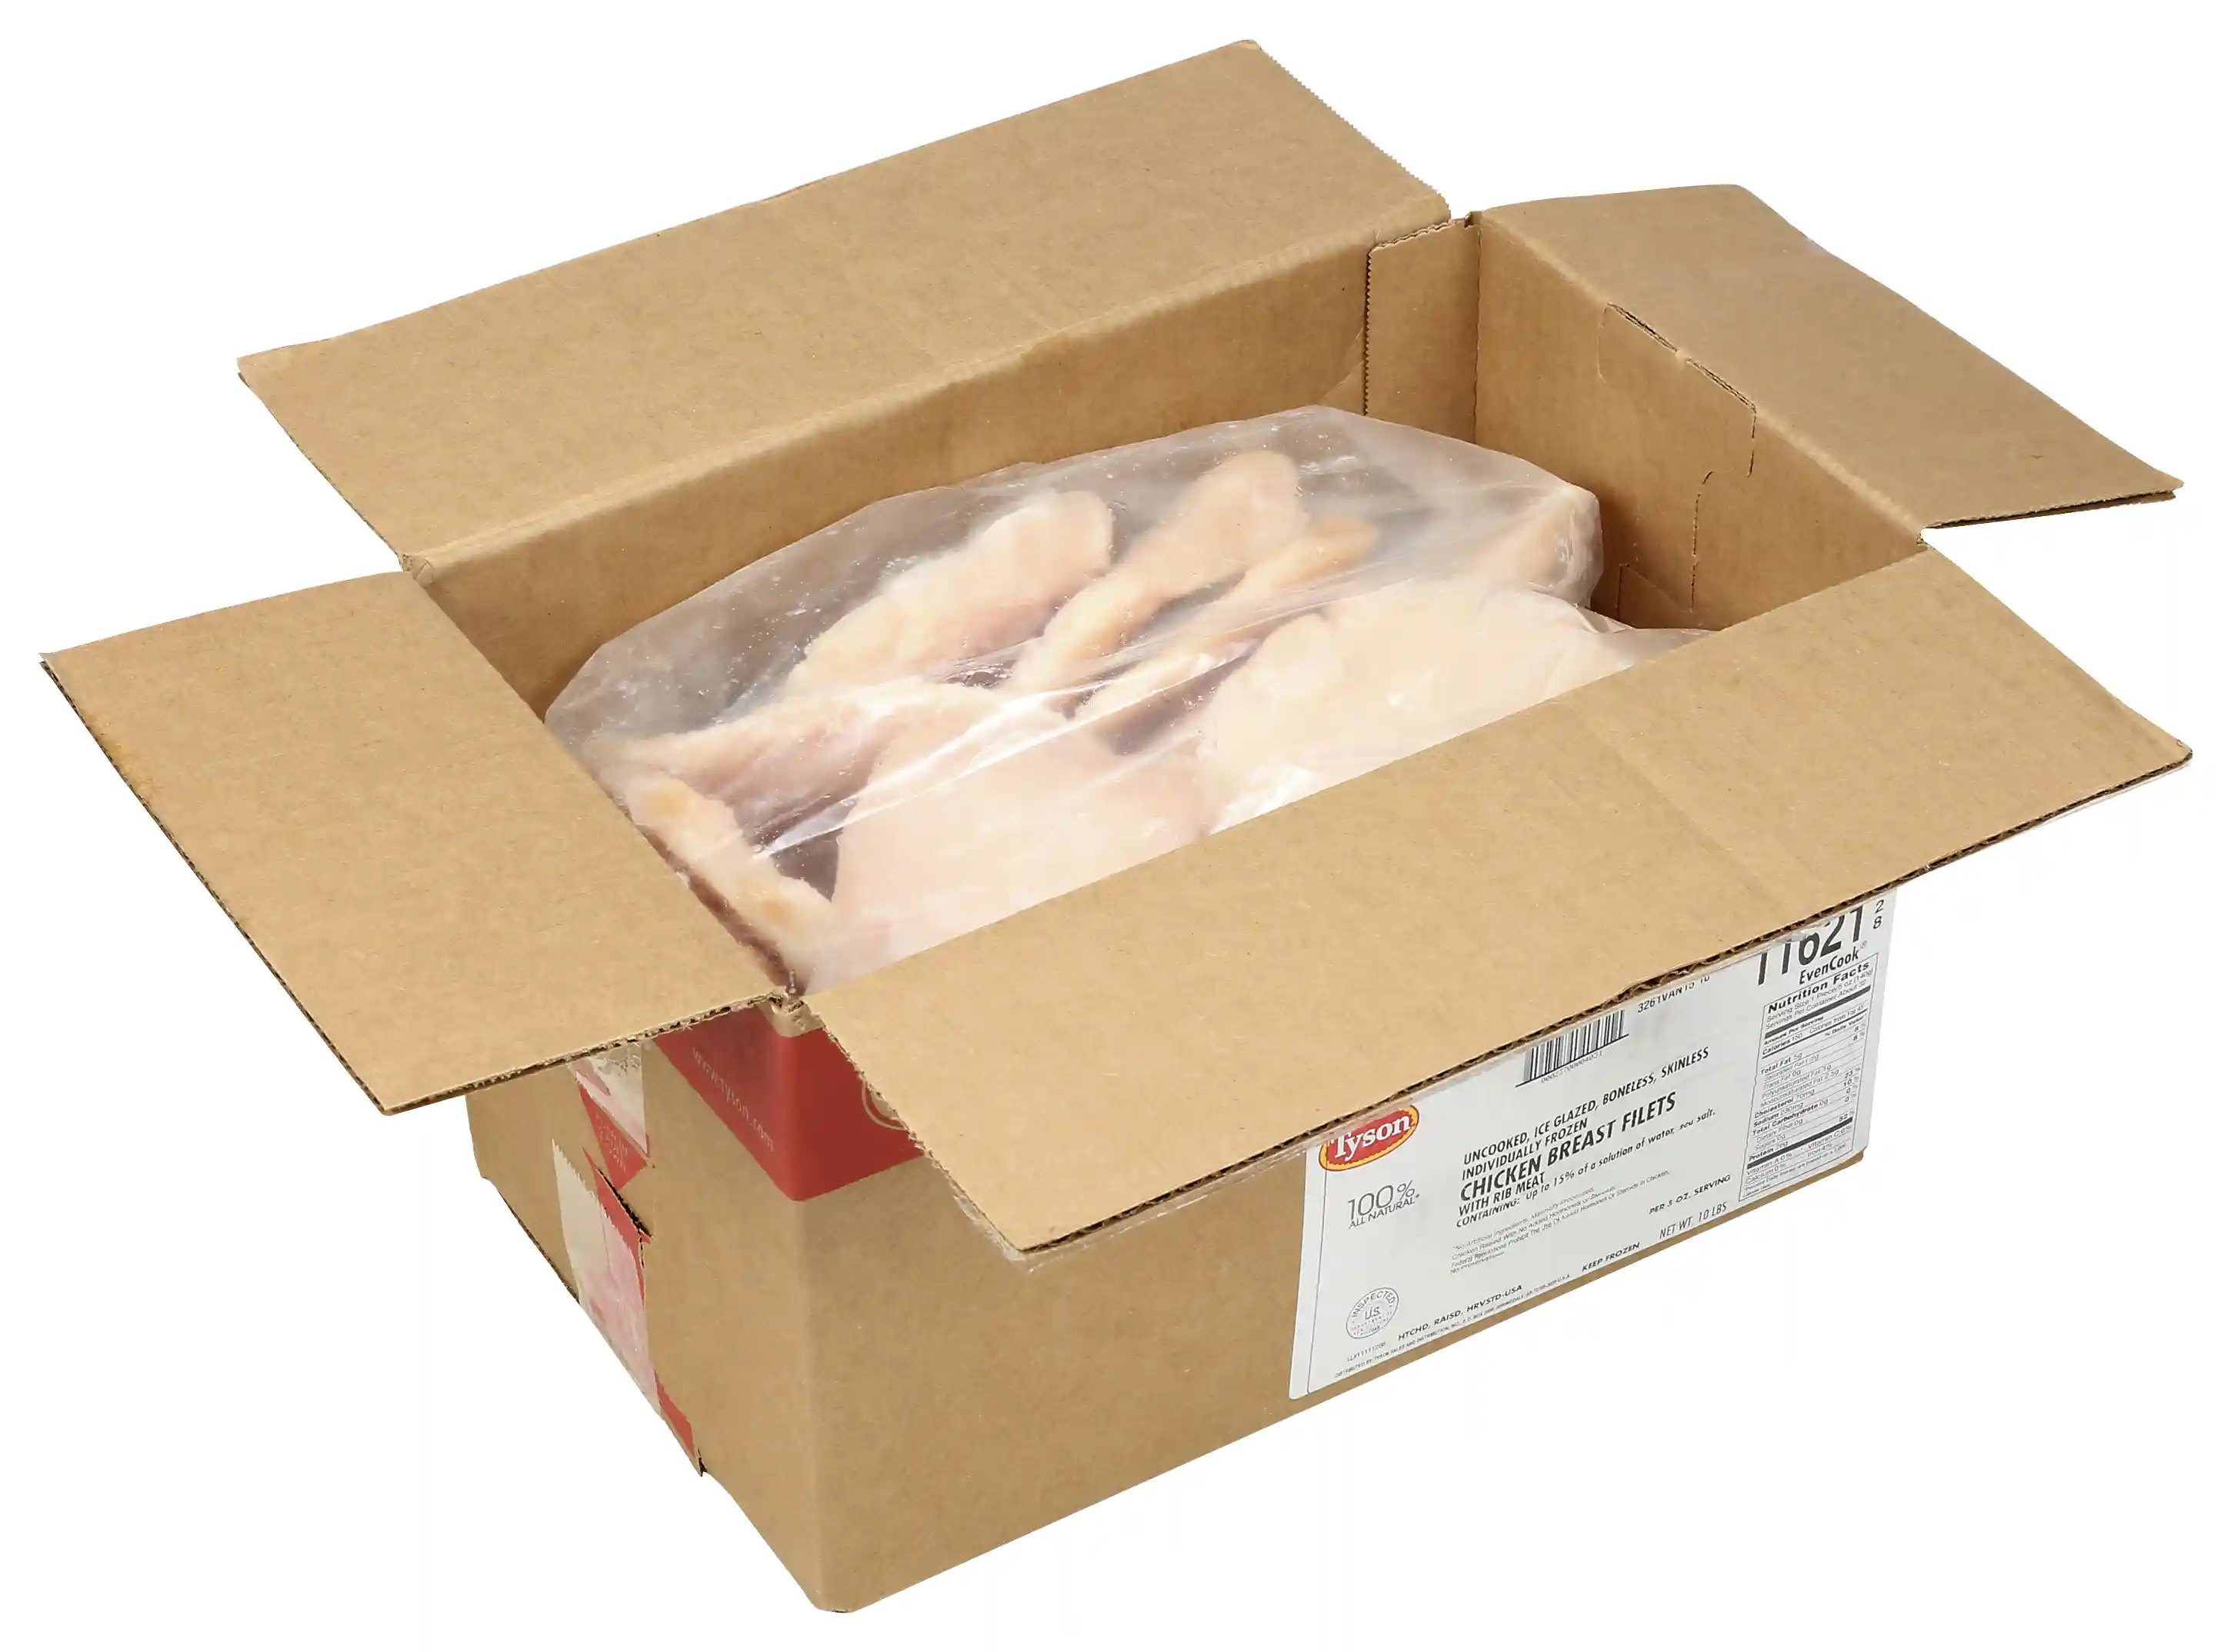 Tyson® EvenCook® All Natural* IF Unbreaded Boneless Skinless Chicken Breast Filets, 5 oz._image_41